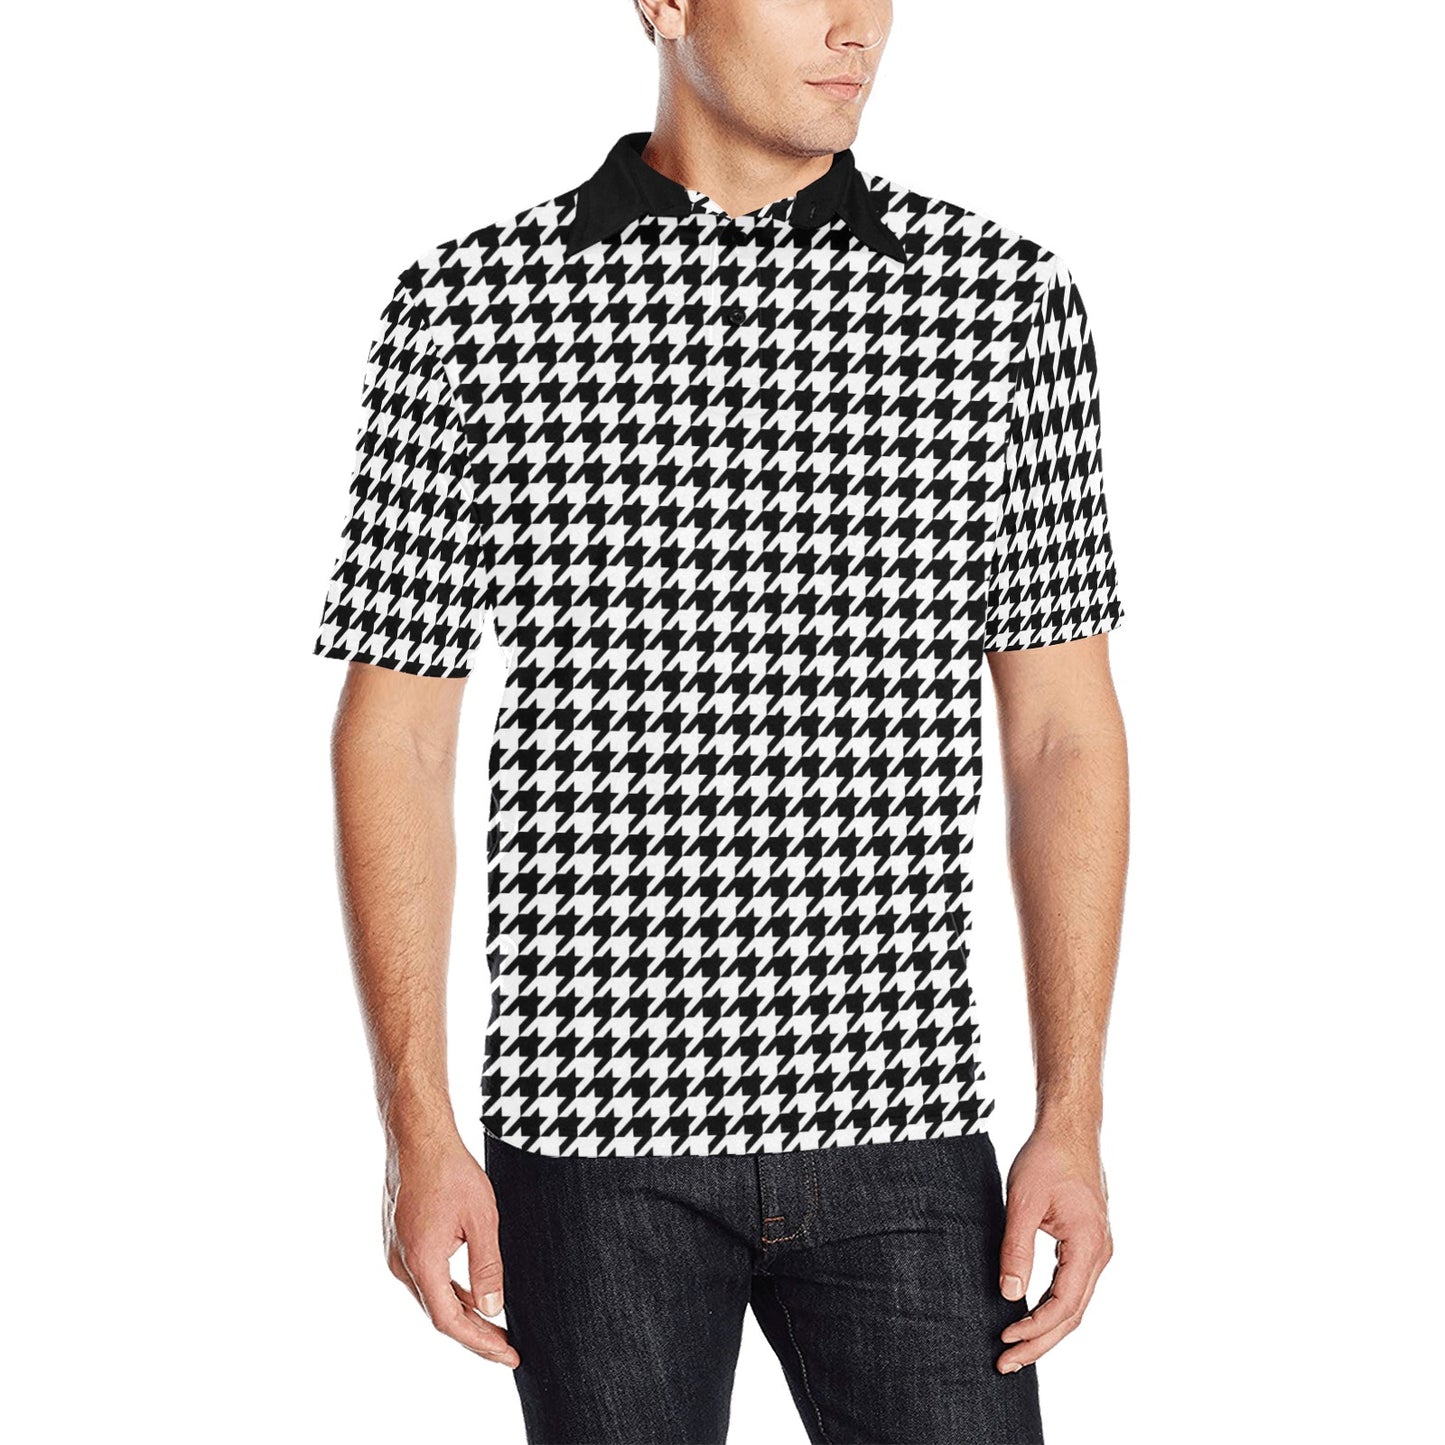 Houndstooth Men Polo Collared Shirt, Vintage Black White Pattern Casual Summer Buttoned Down Up Shirt Short Sleeve Sports Golf Tee Starcove Fashion